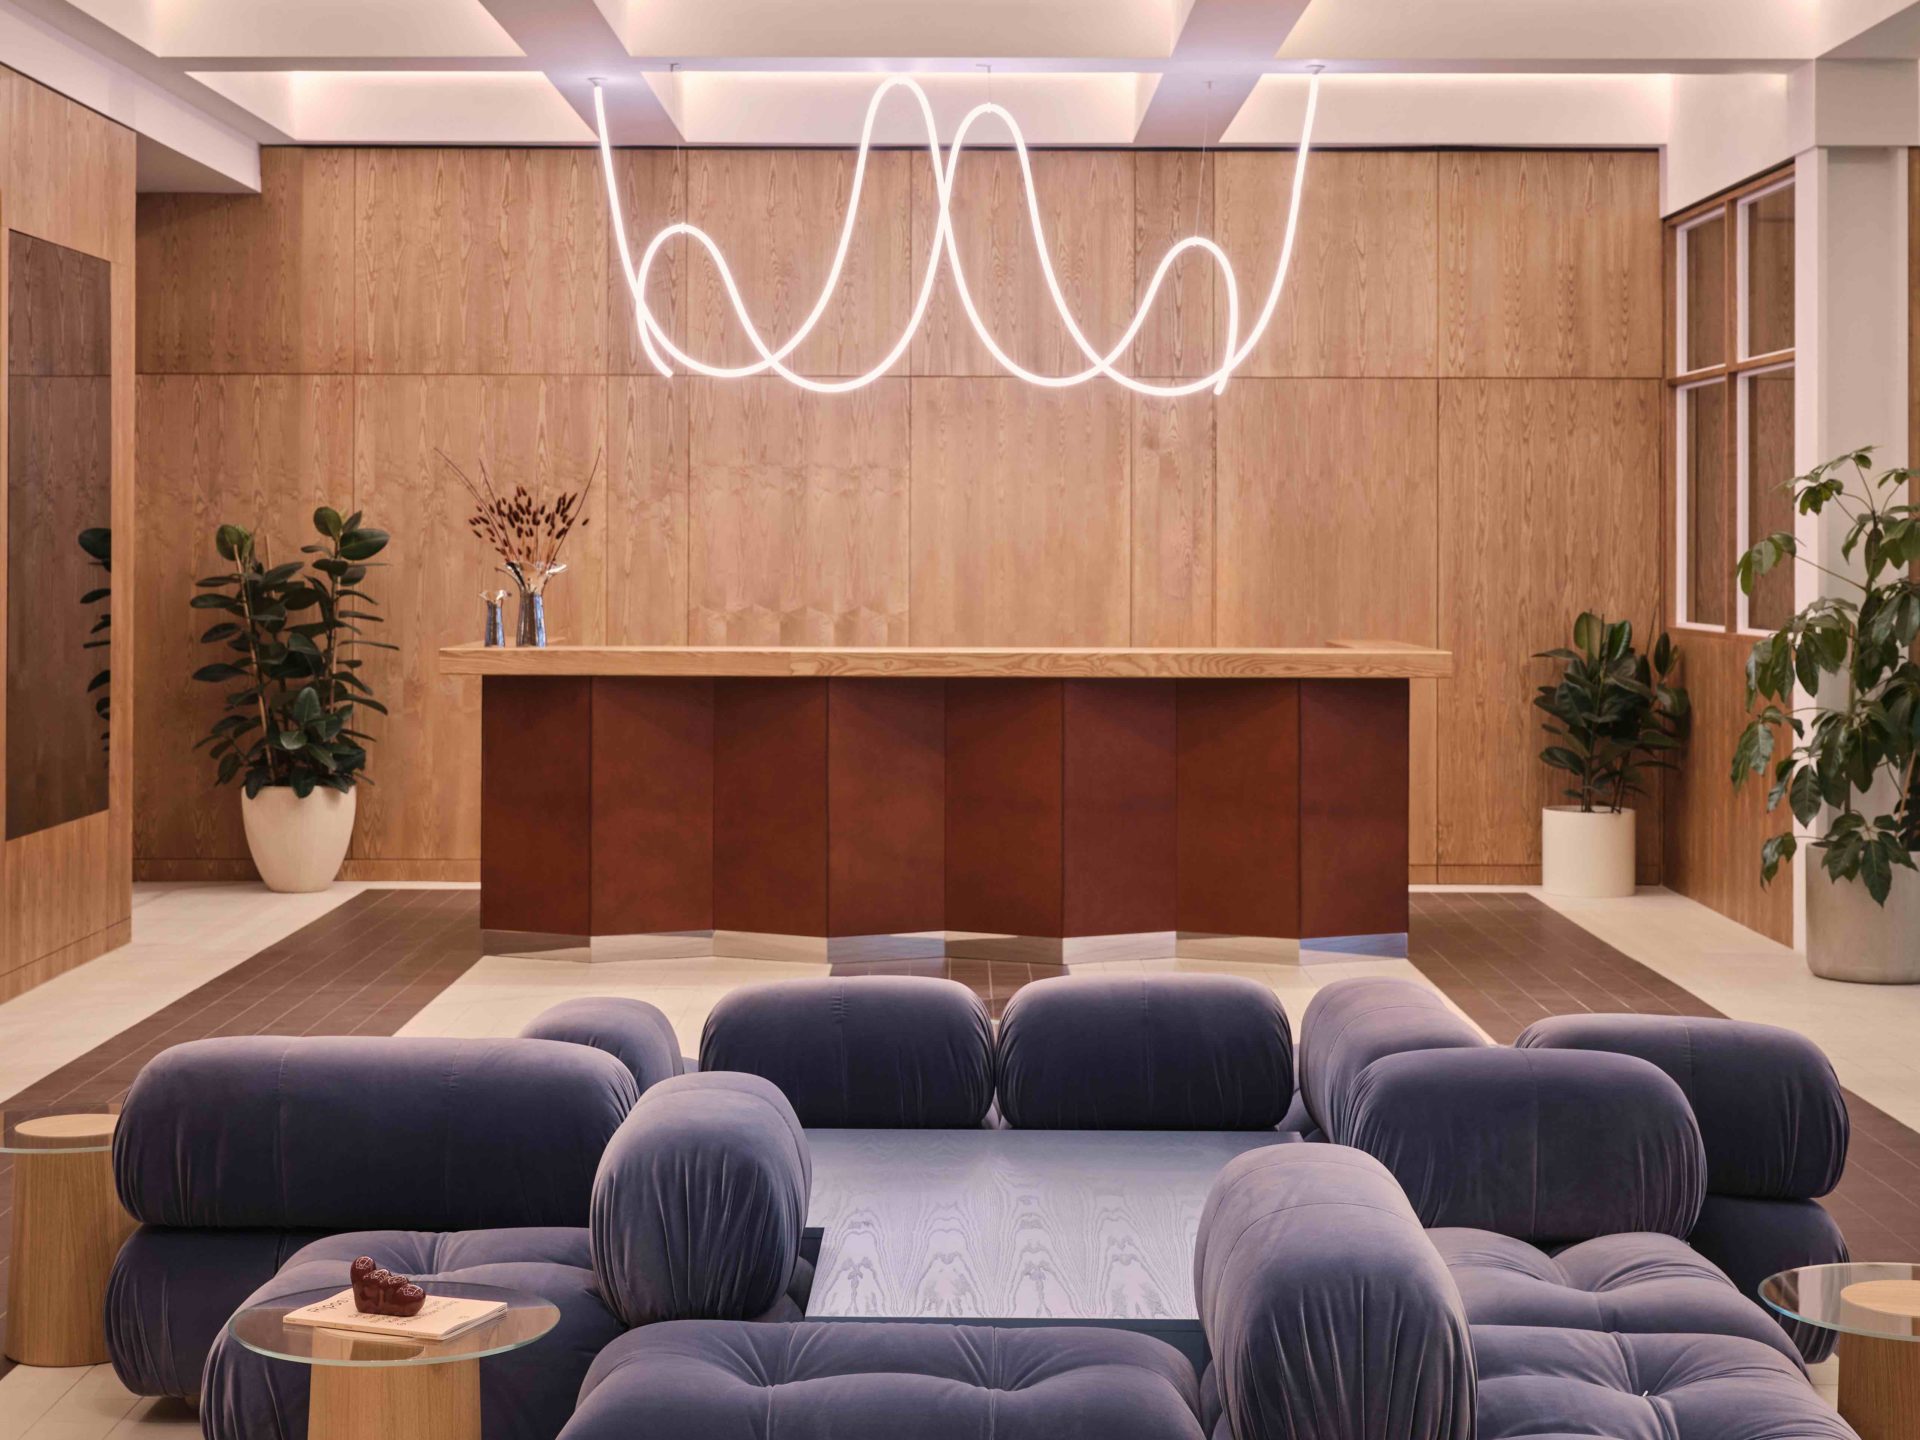 The Office Group’s 210 Euston Road offers ample opportunity for a variety of working styles